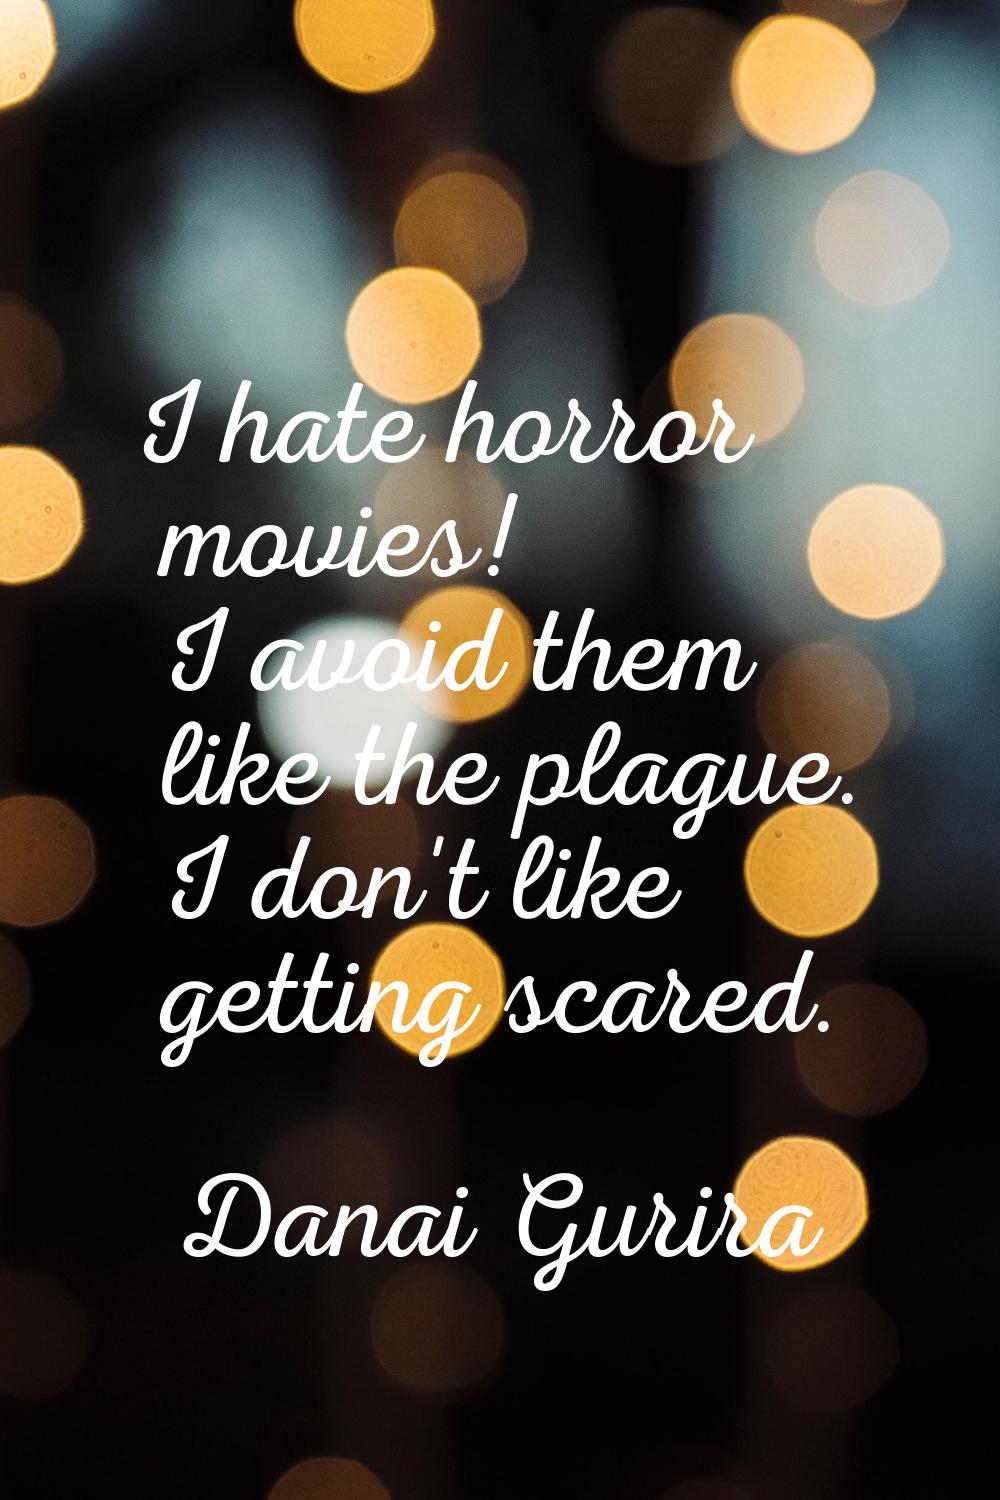 I hate horror movies! I avoid them like the plague. I don't like getting scared.